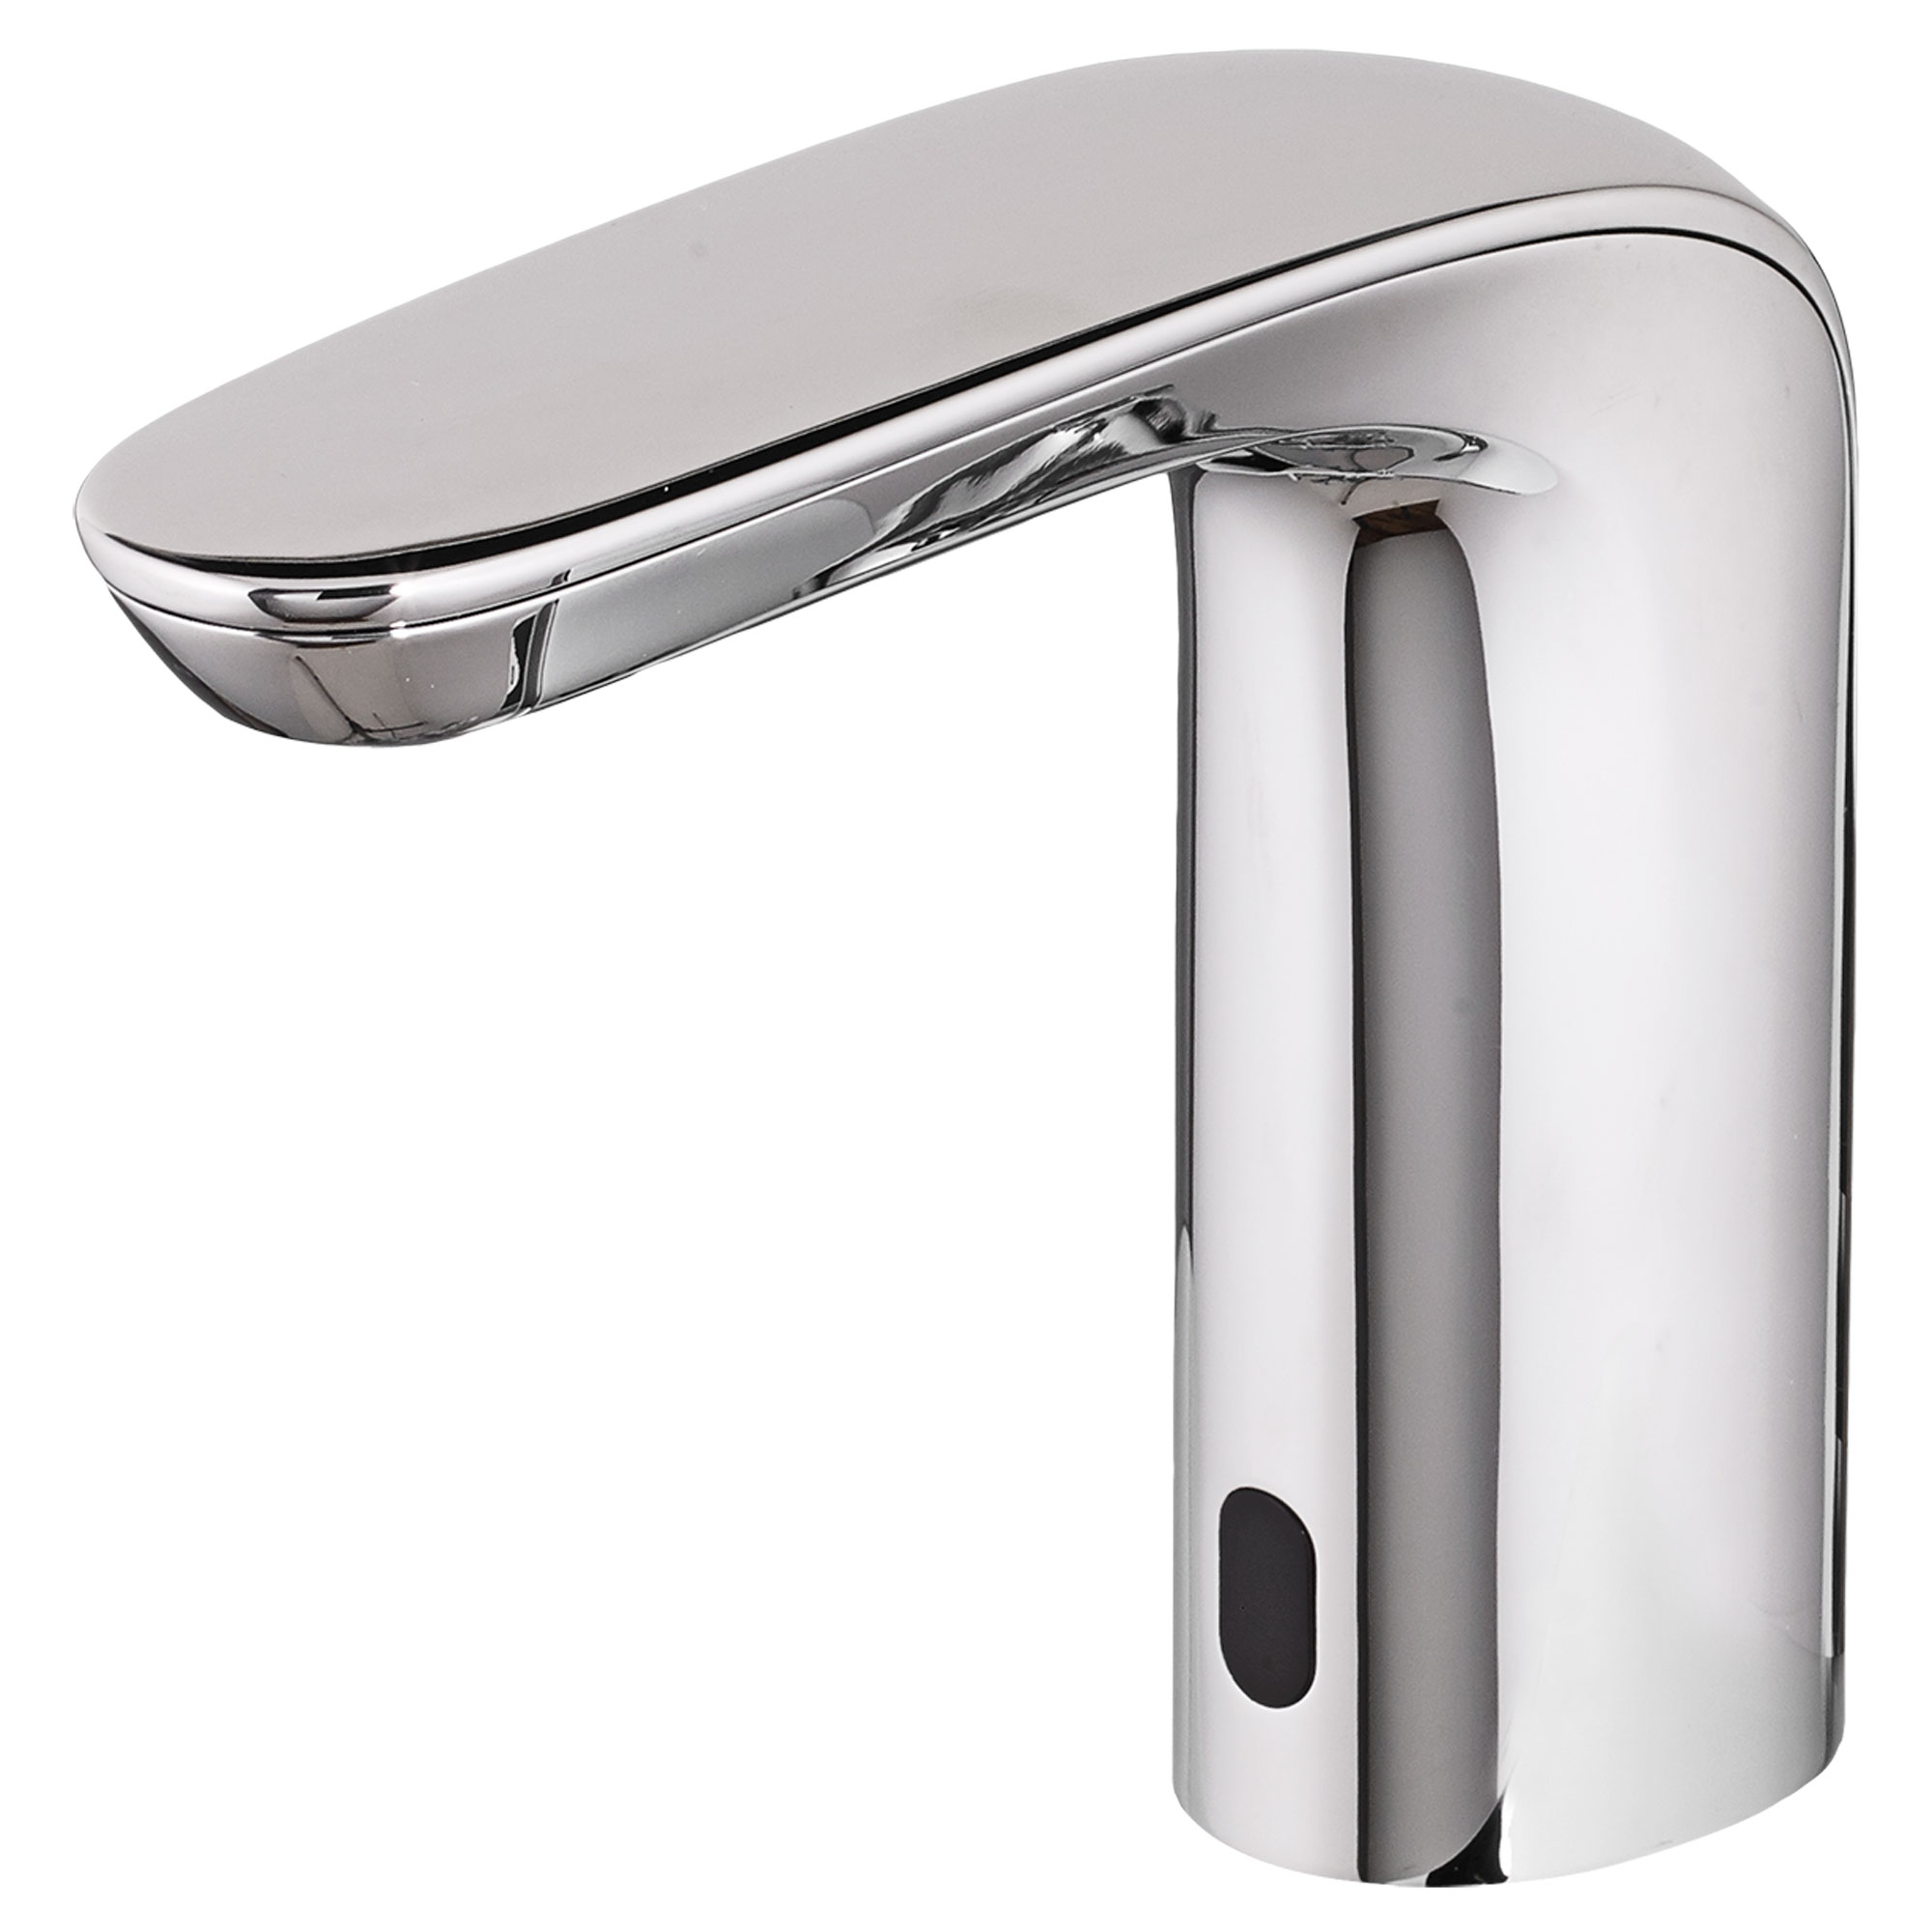 NextGen Selectronic™ Touchless Faucet, Battery-Powered, 0.5 gpm/1.9 Lpm